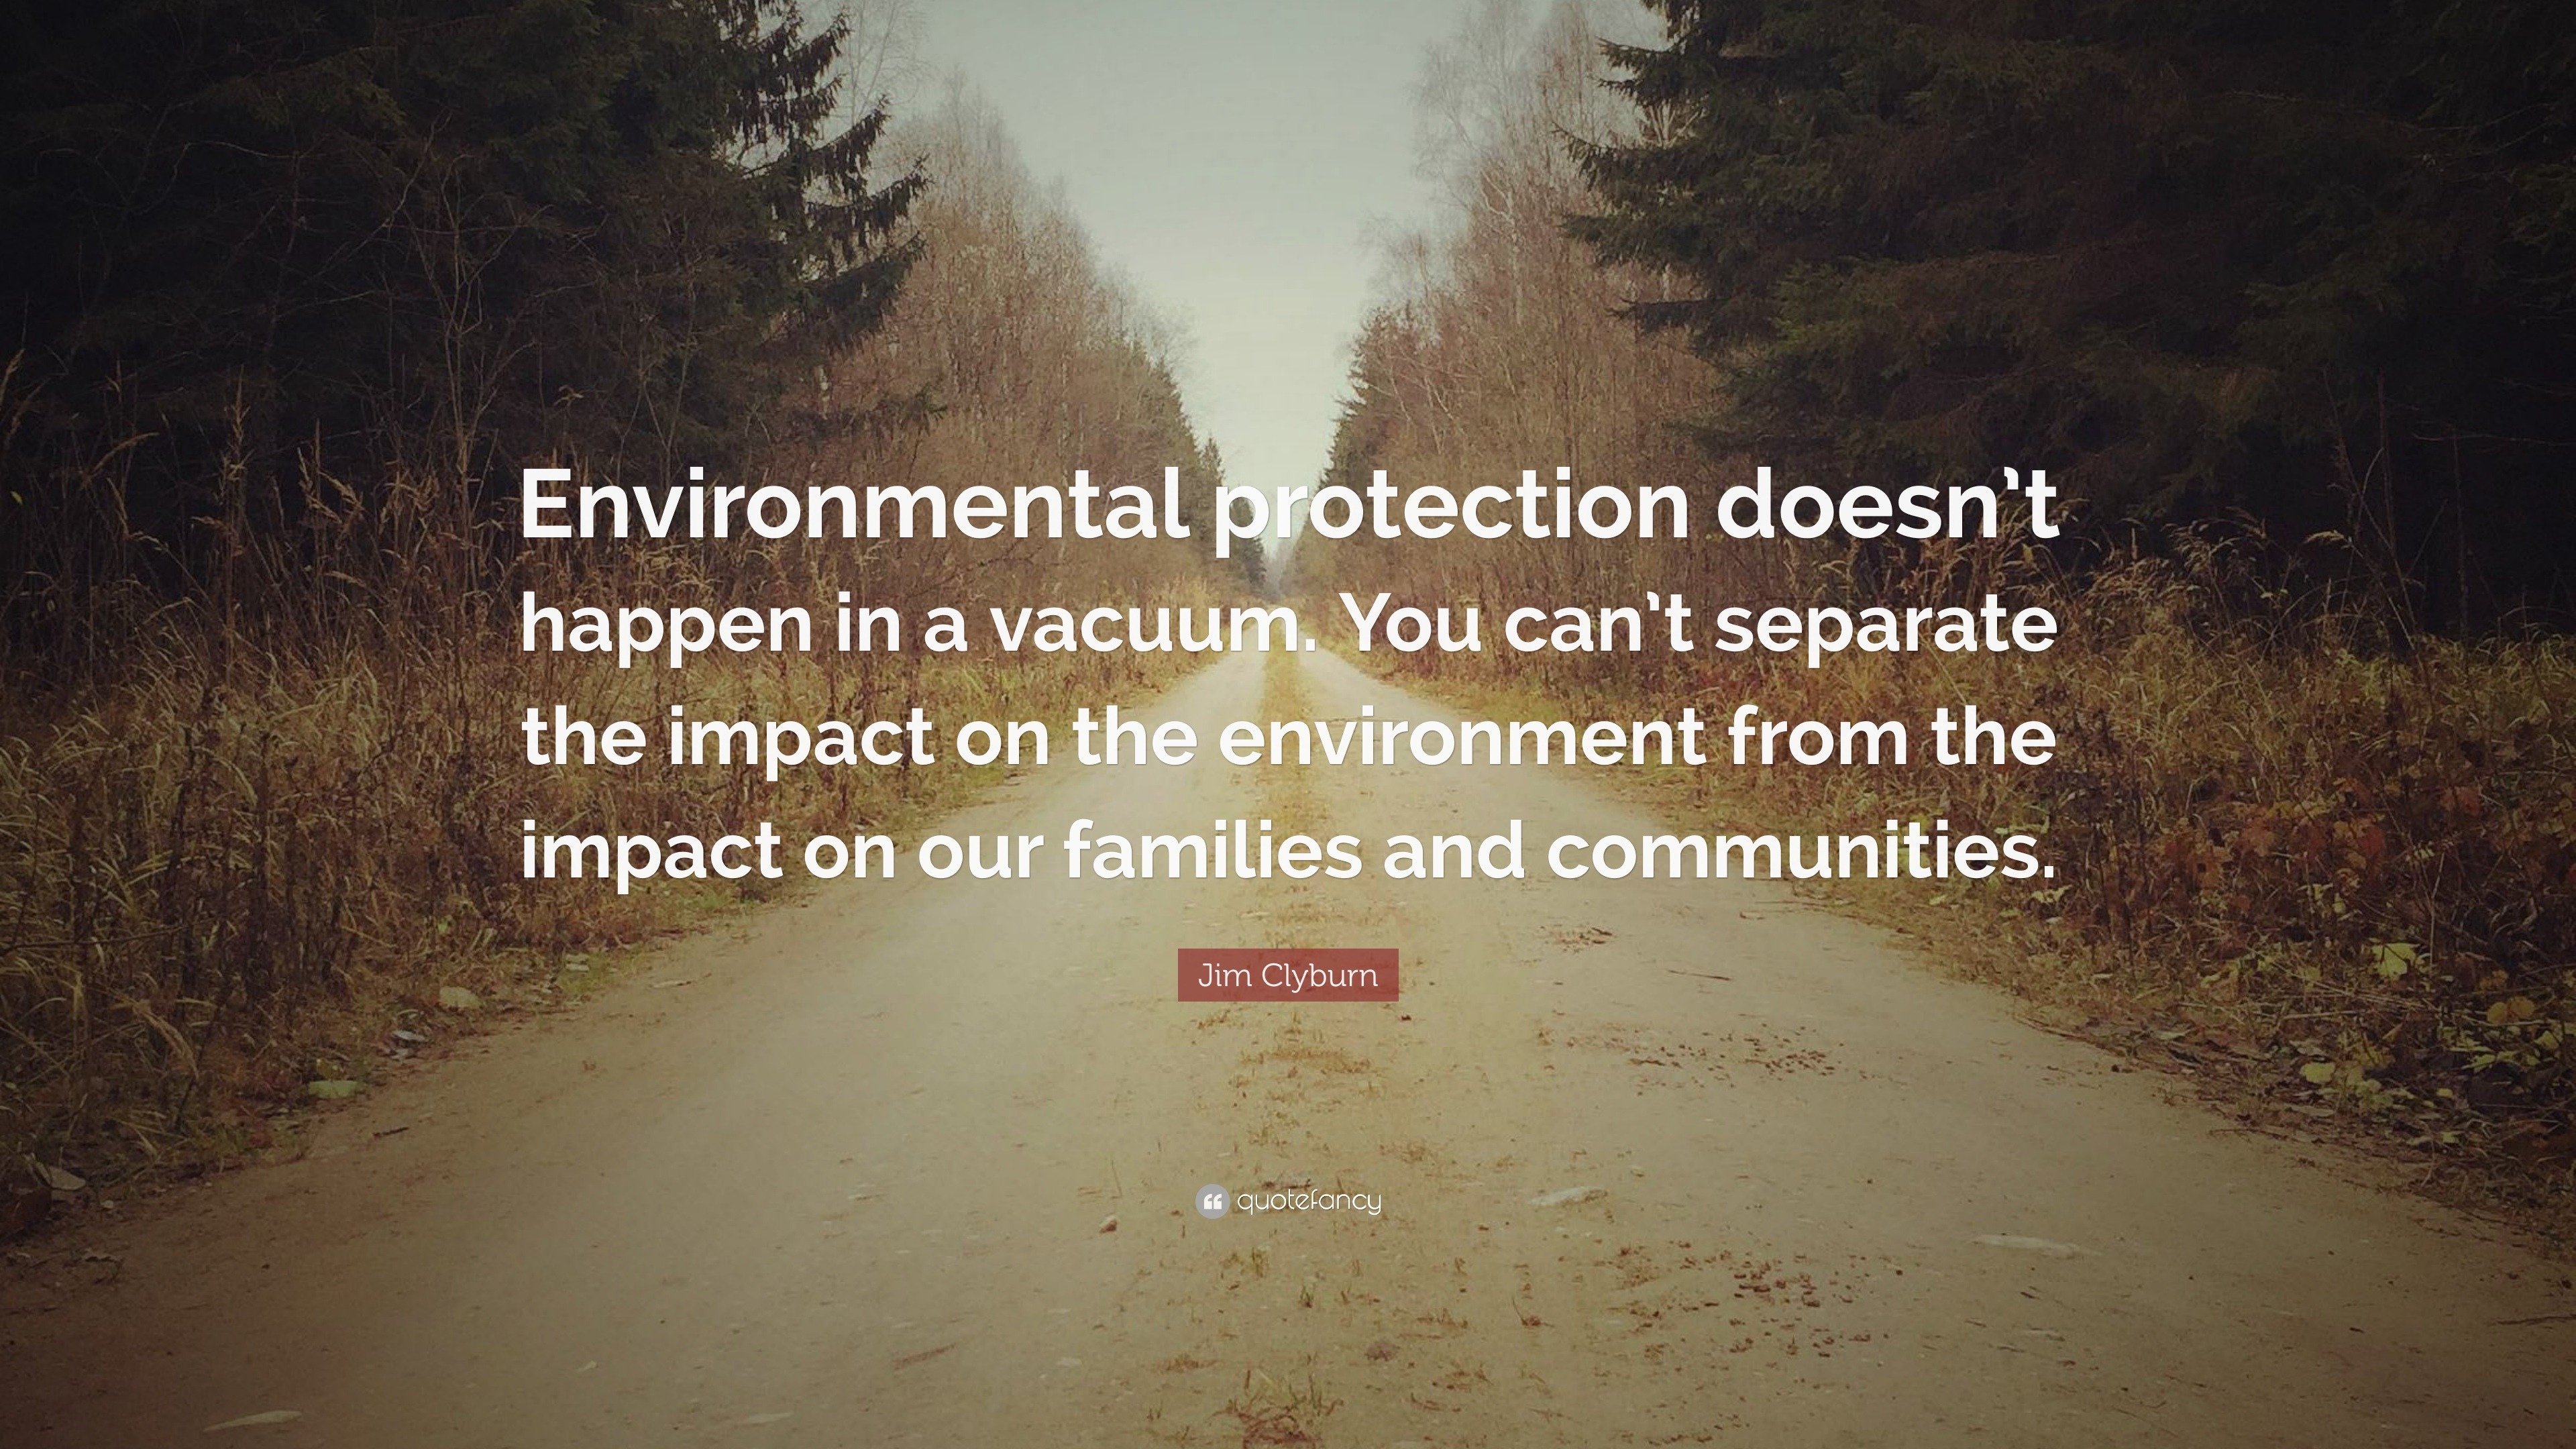 Jim Clyburn Quote: “Environmental protection doesn’t happen in a vacuum